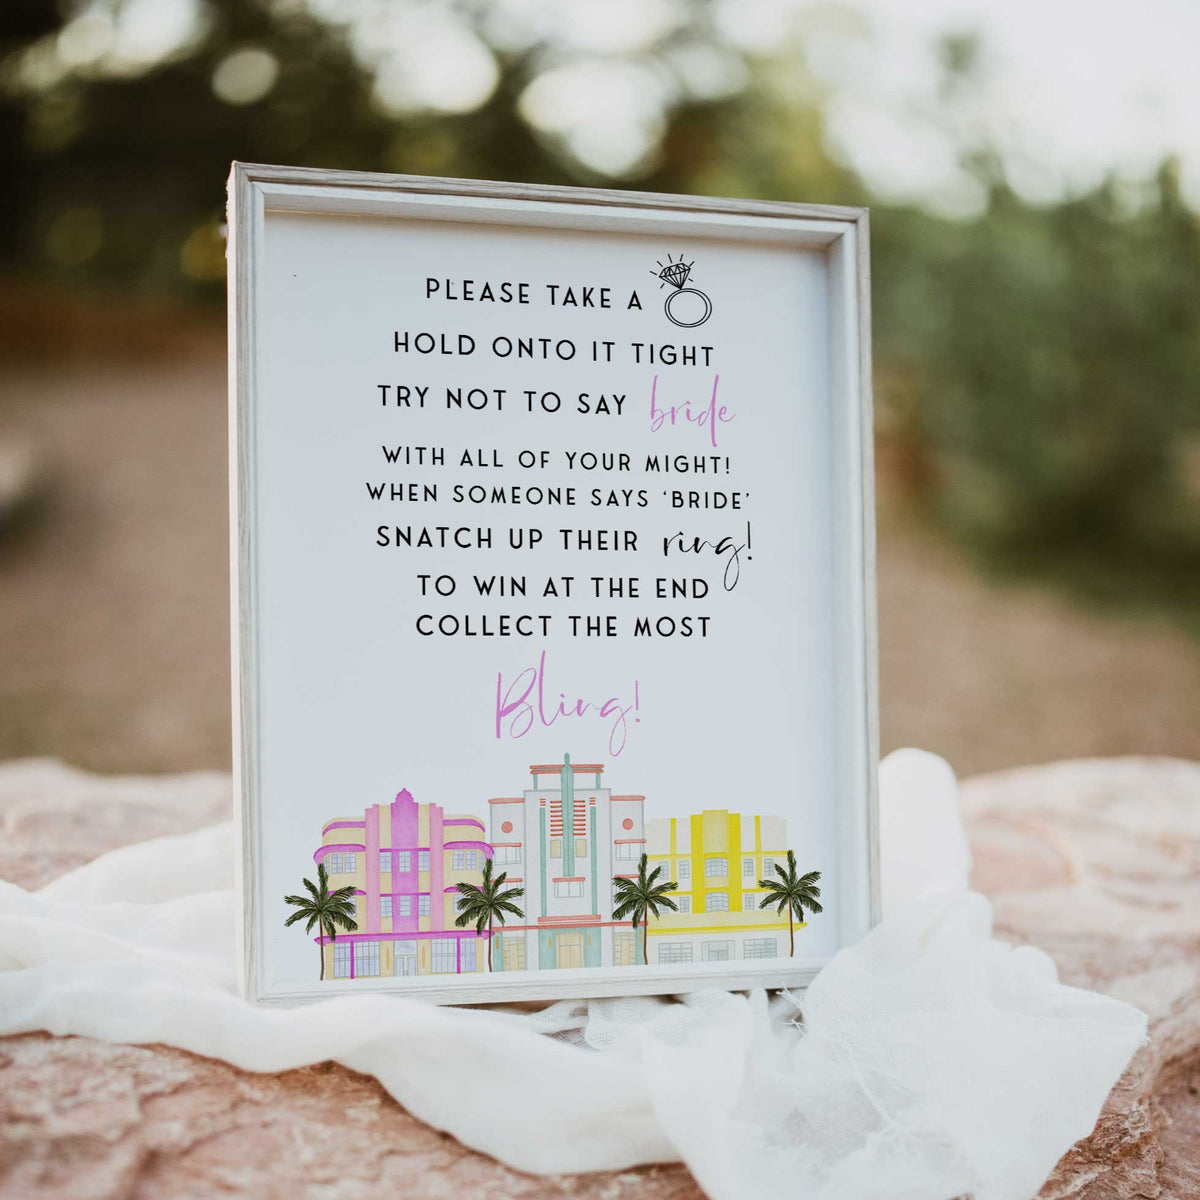 Fully editable and printable please take a ring game with a miami design. Perfect for a miami, Bachelorette themed party